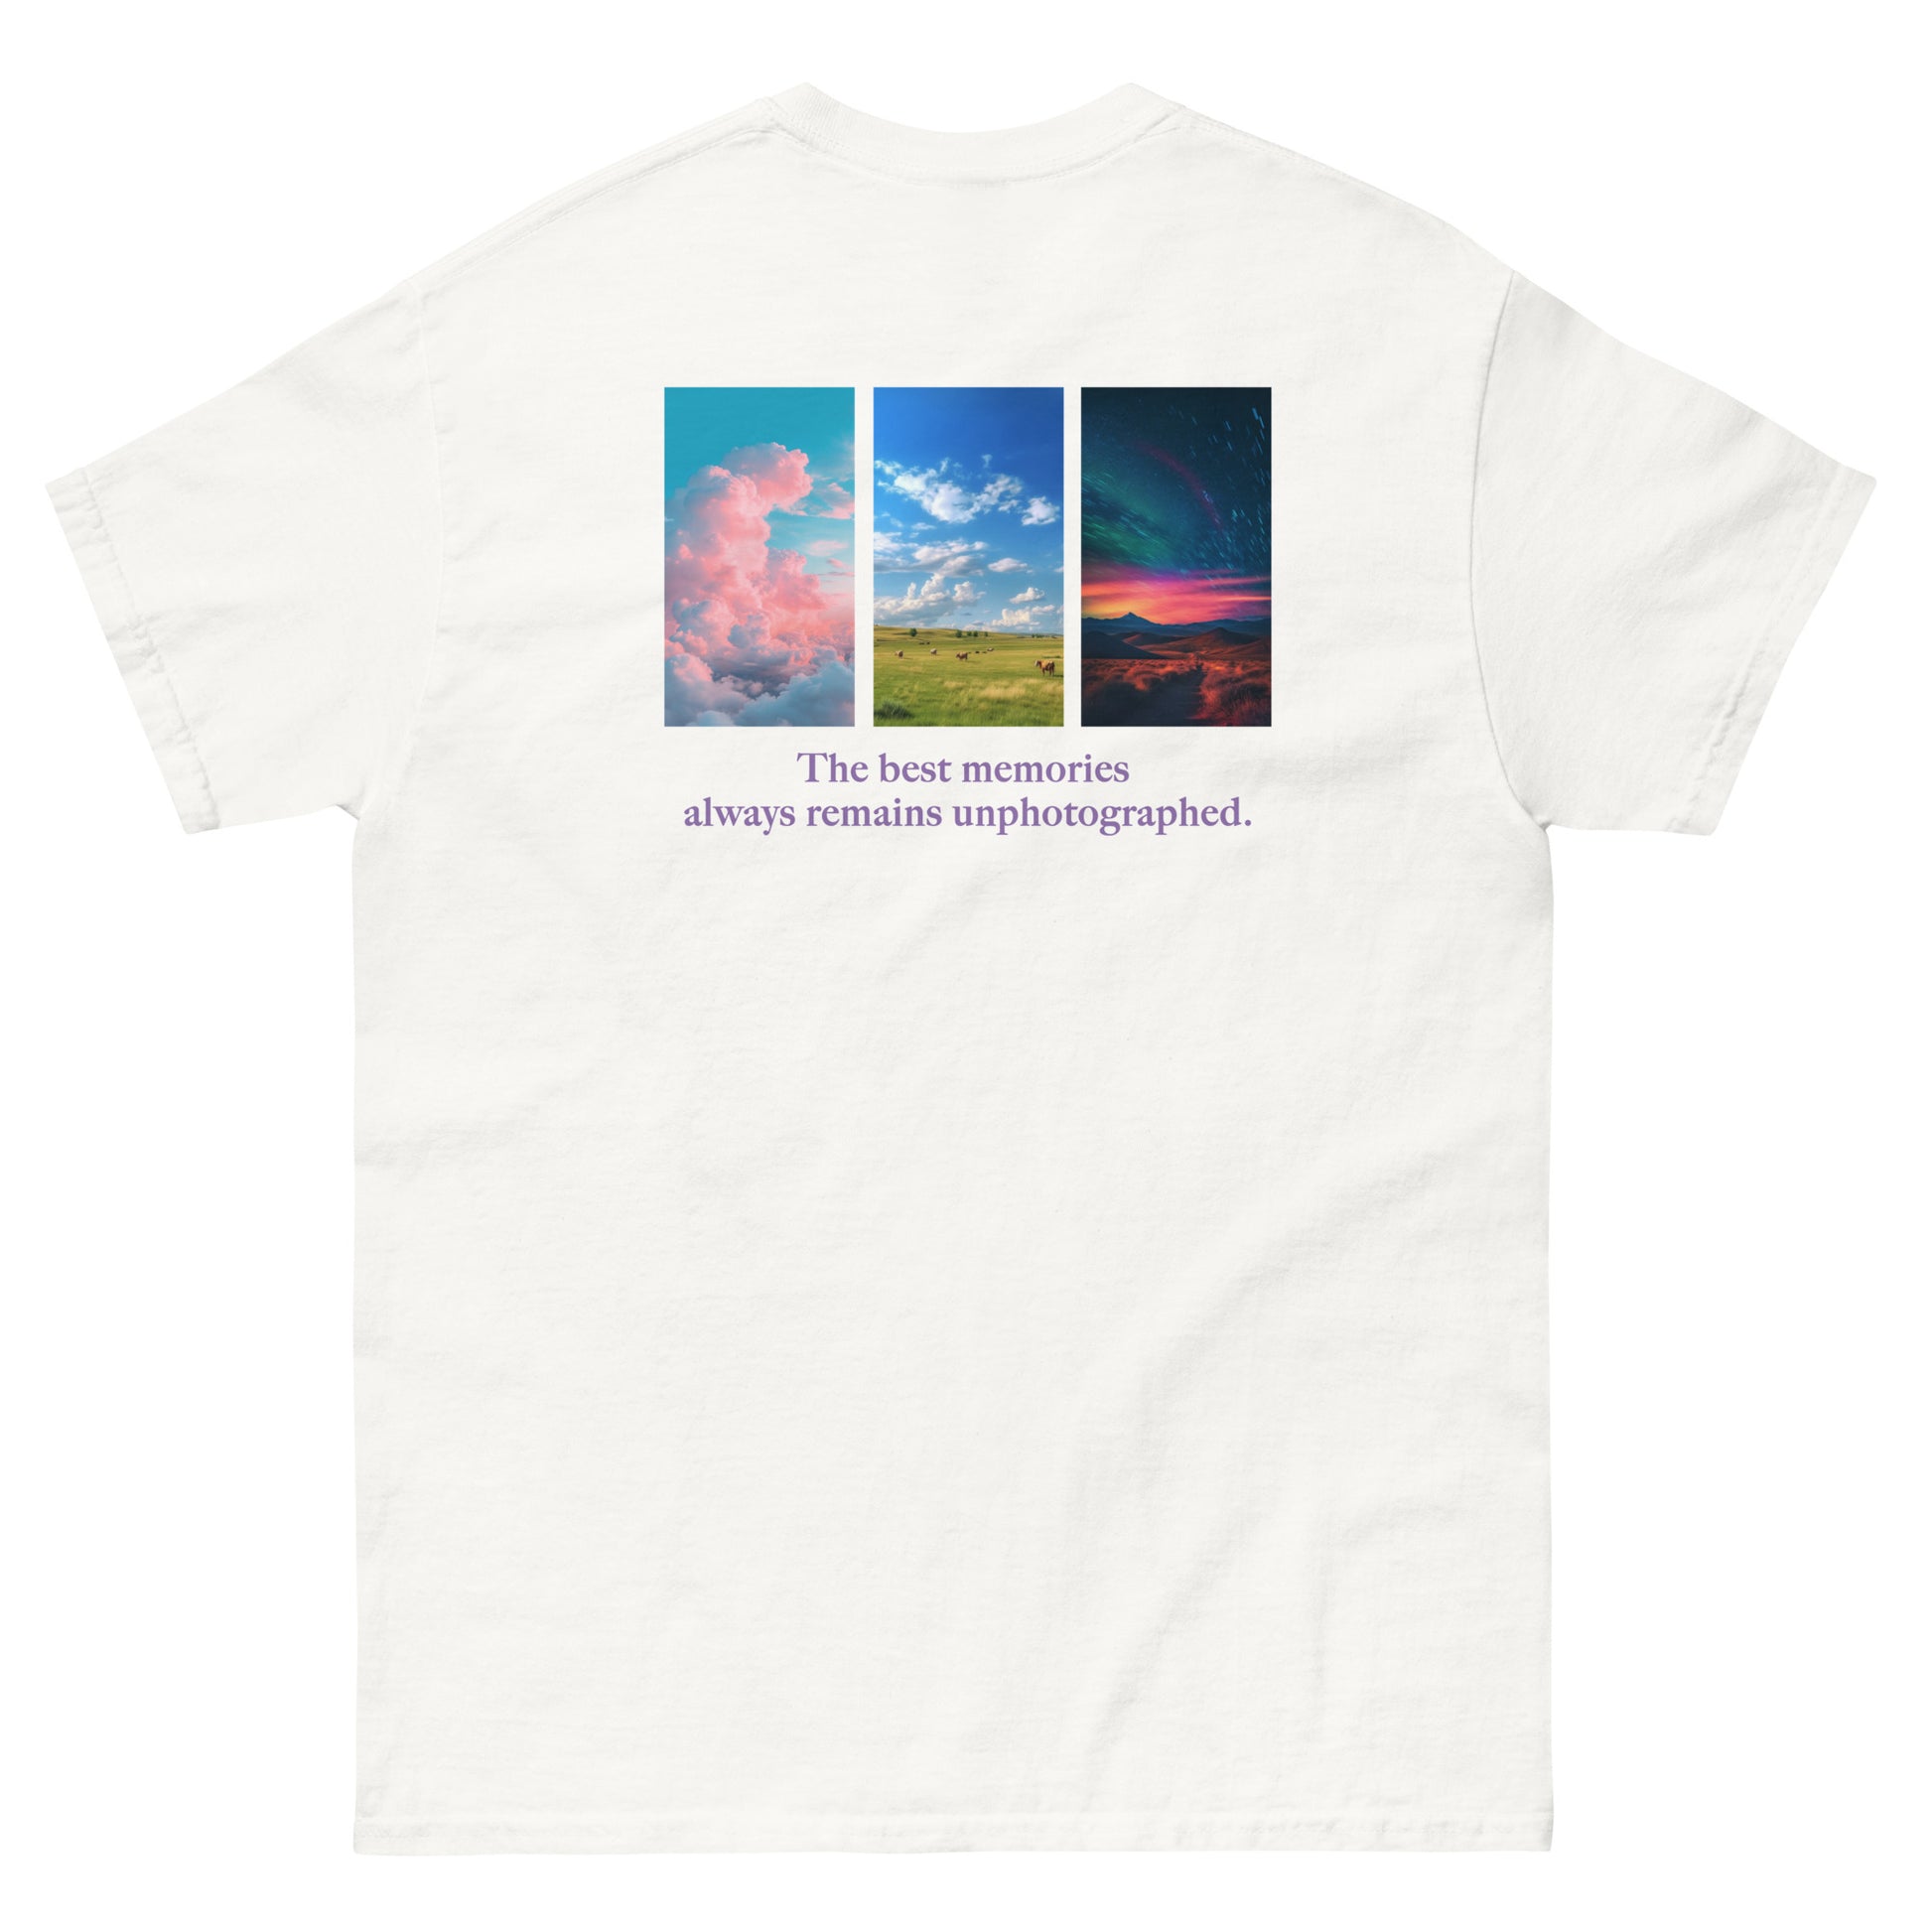 White High Quality Tee - Front Design with "The best memories always remains unphotographed " print on left chest - Back Design with a Phrase "The best memories always remains unphotographed." print and three pictures of sky.